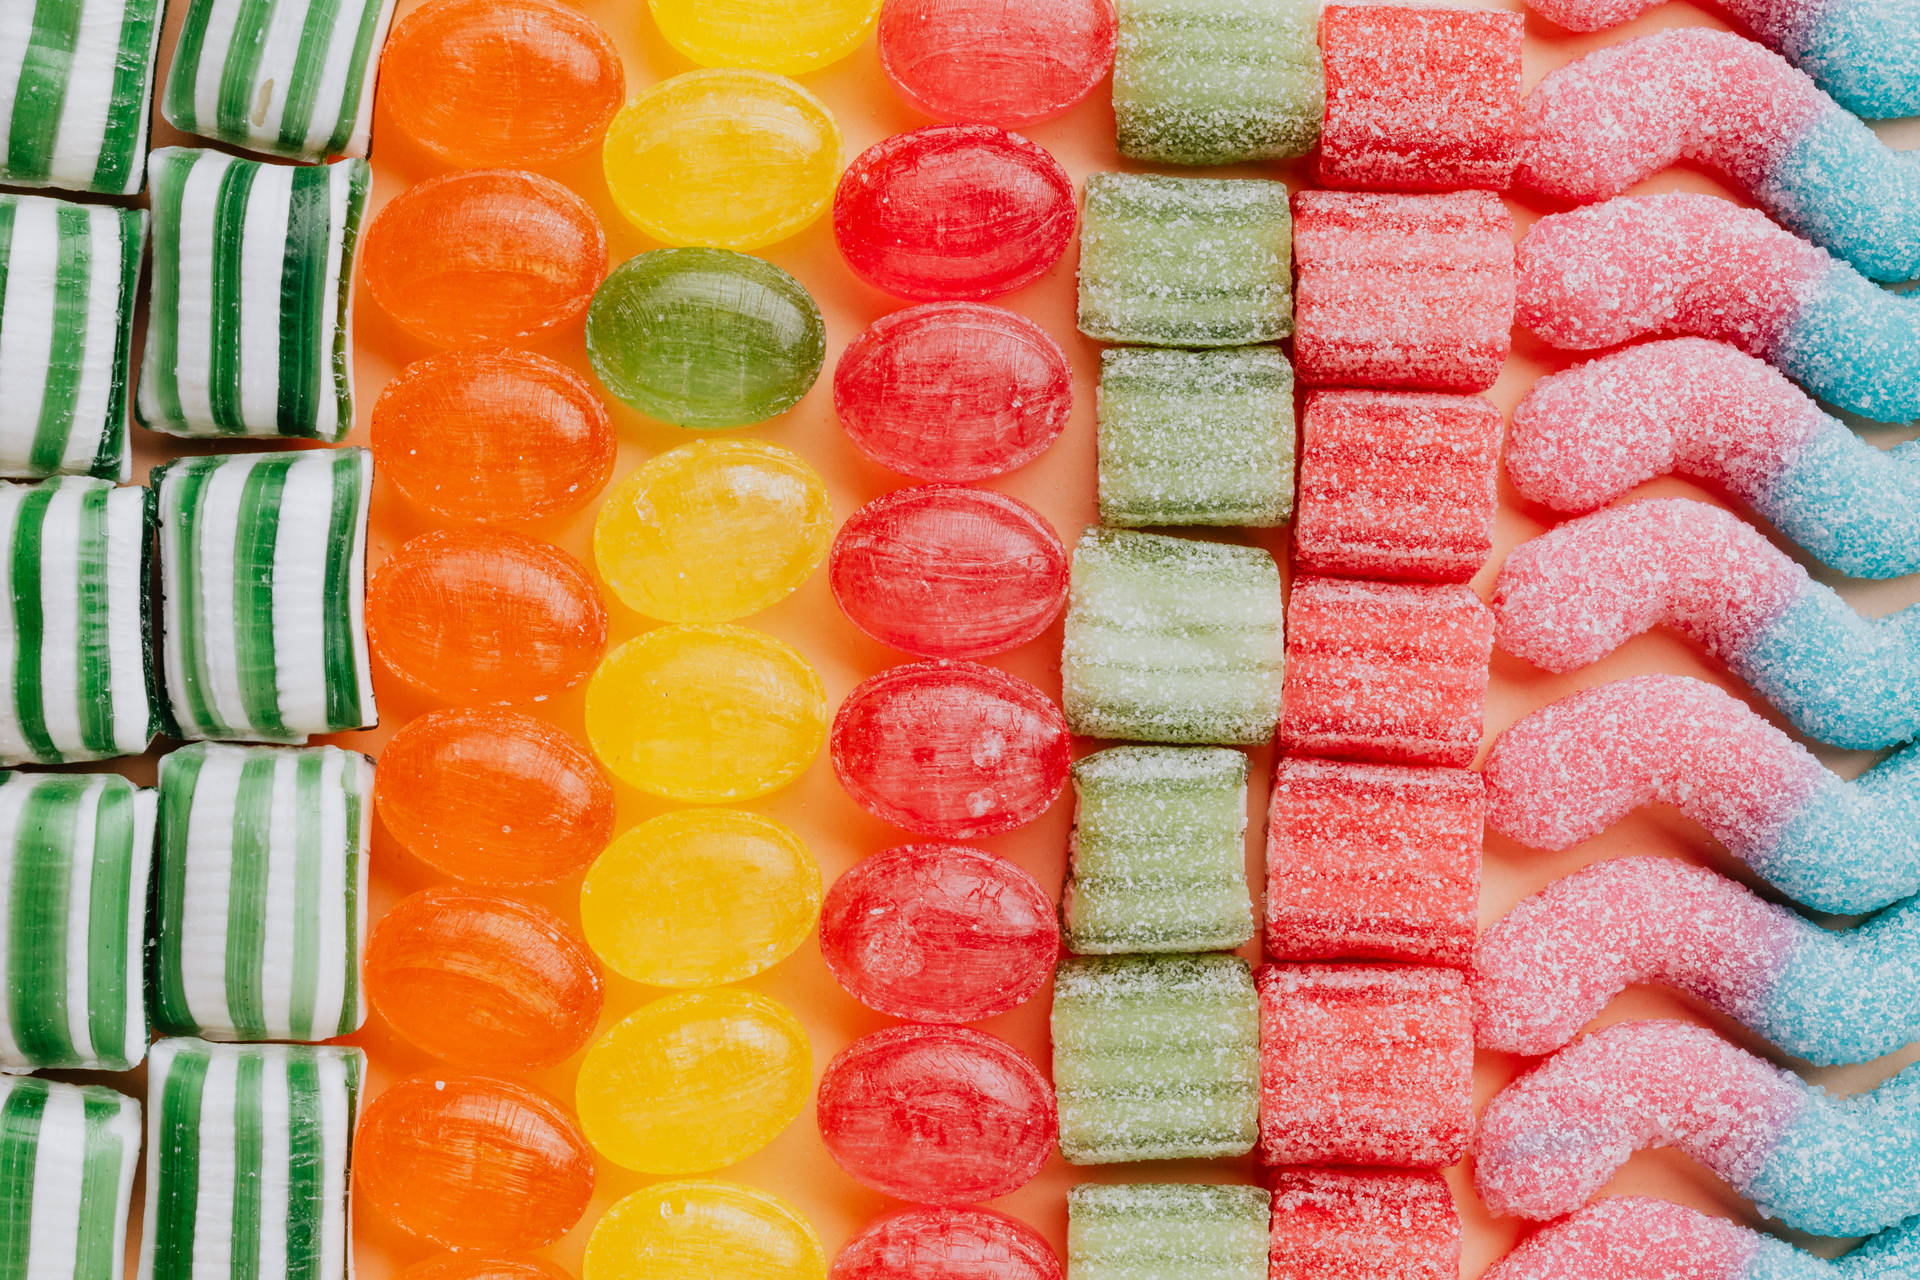 Various Candies For Colorful Background Wallpaper